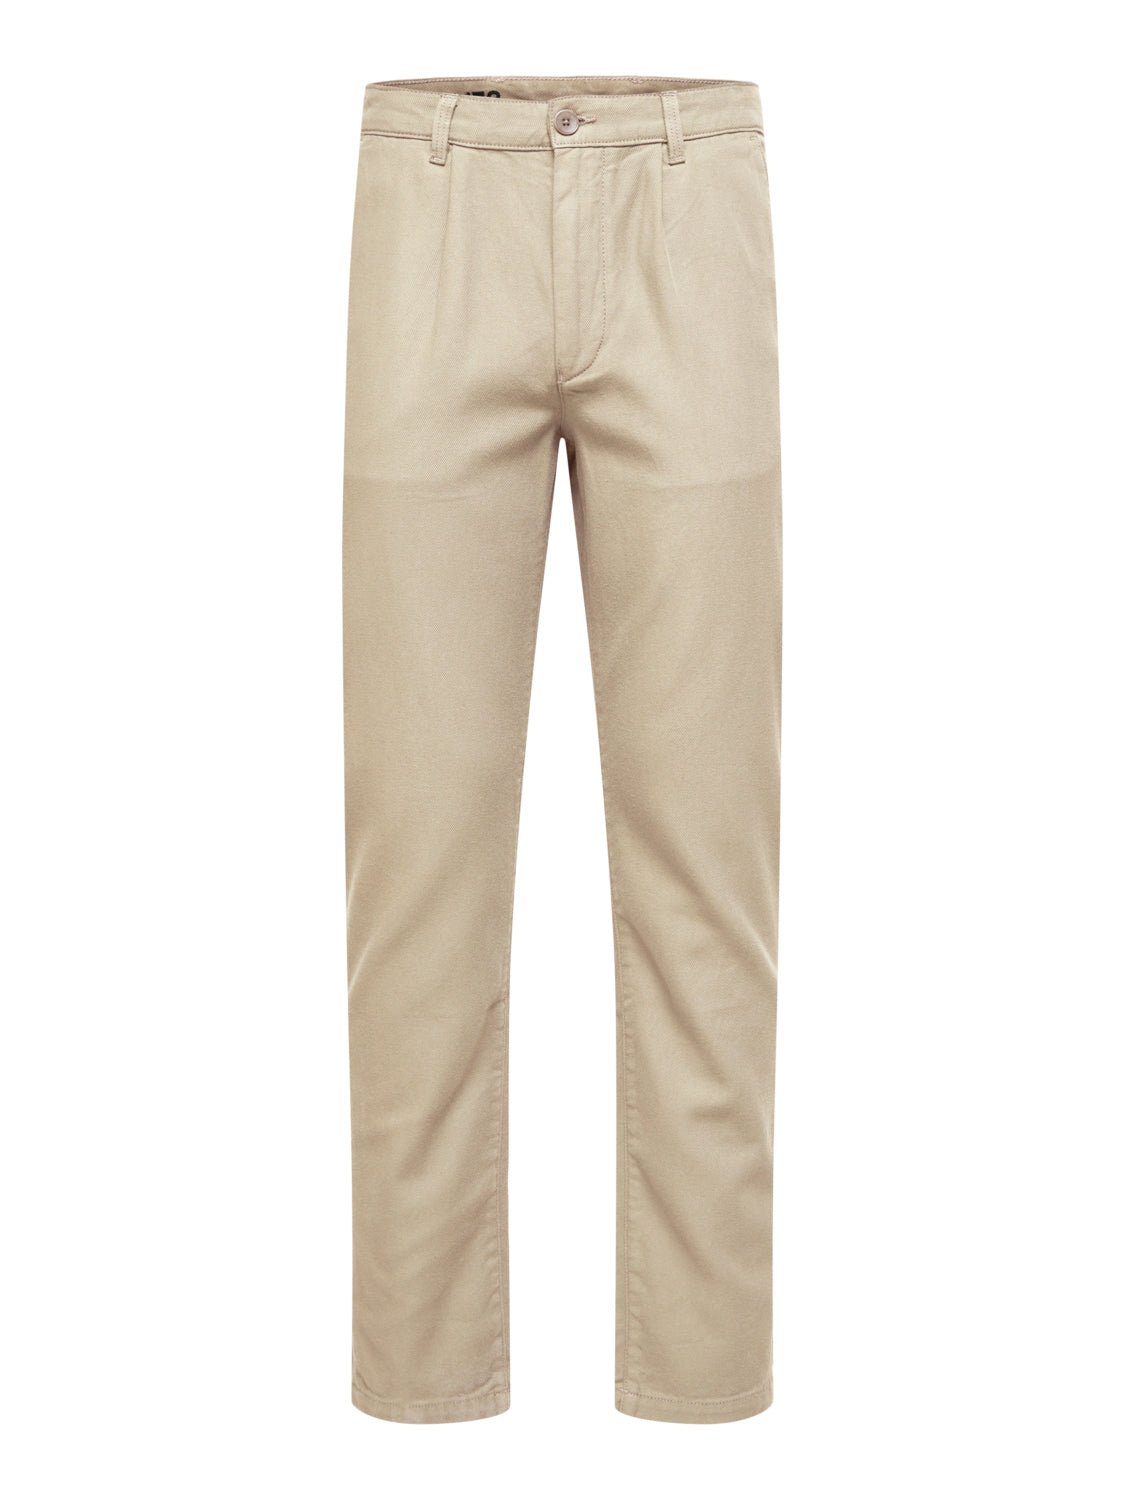 SELECTED HOMME - SLIM TAPERED-JAX Pants - Oatmeal